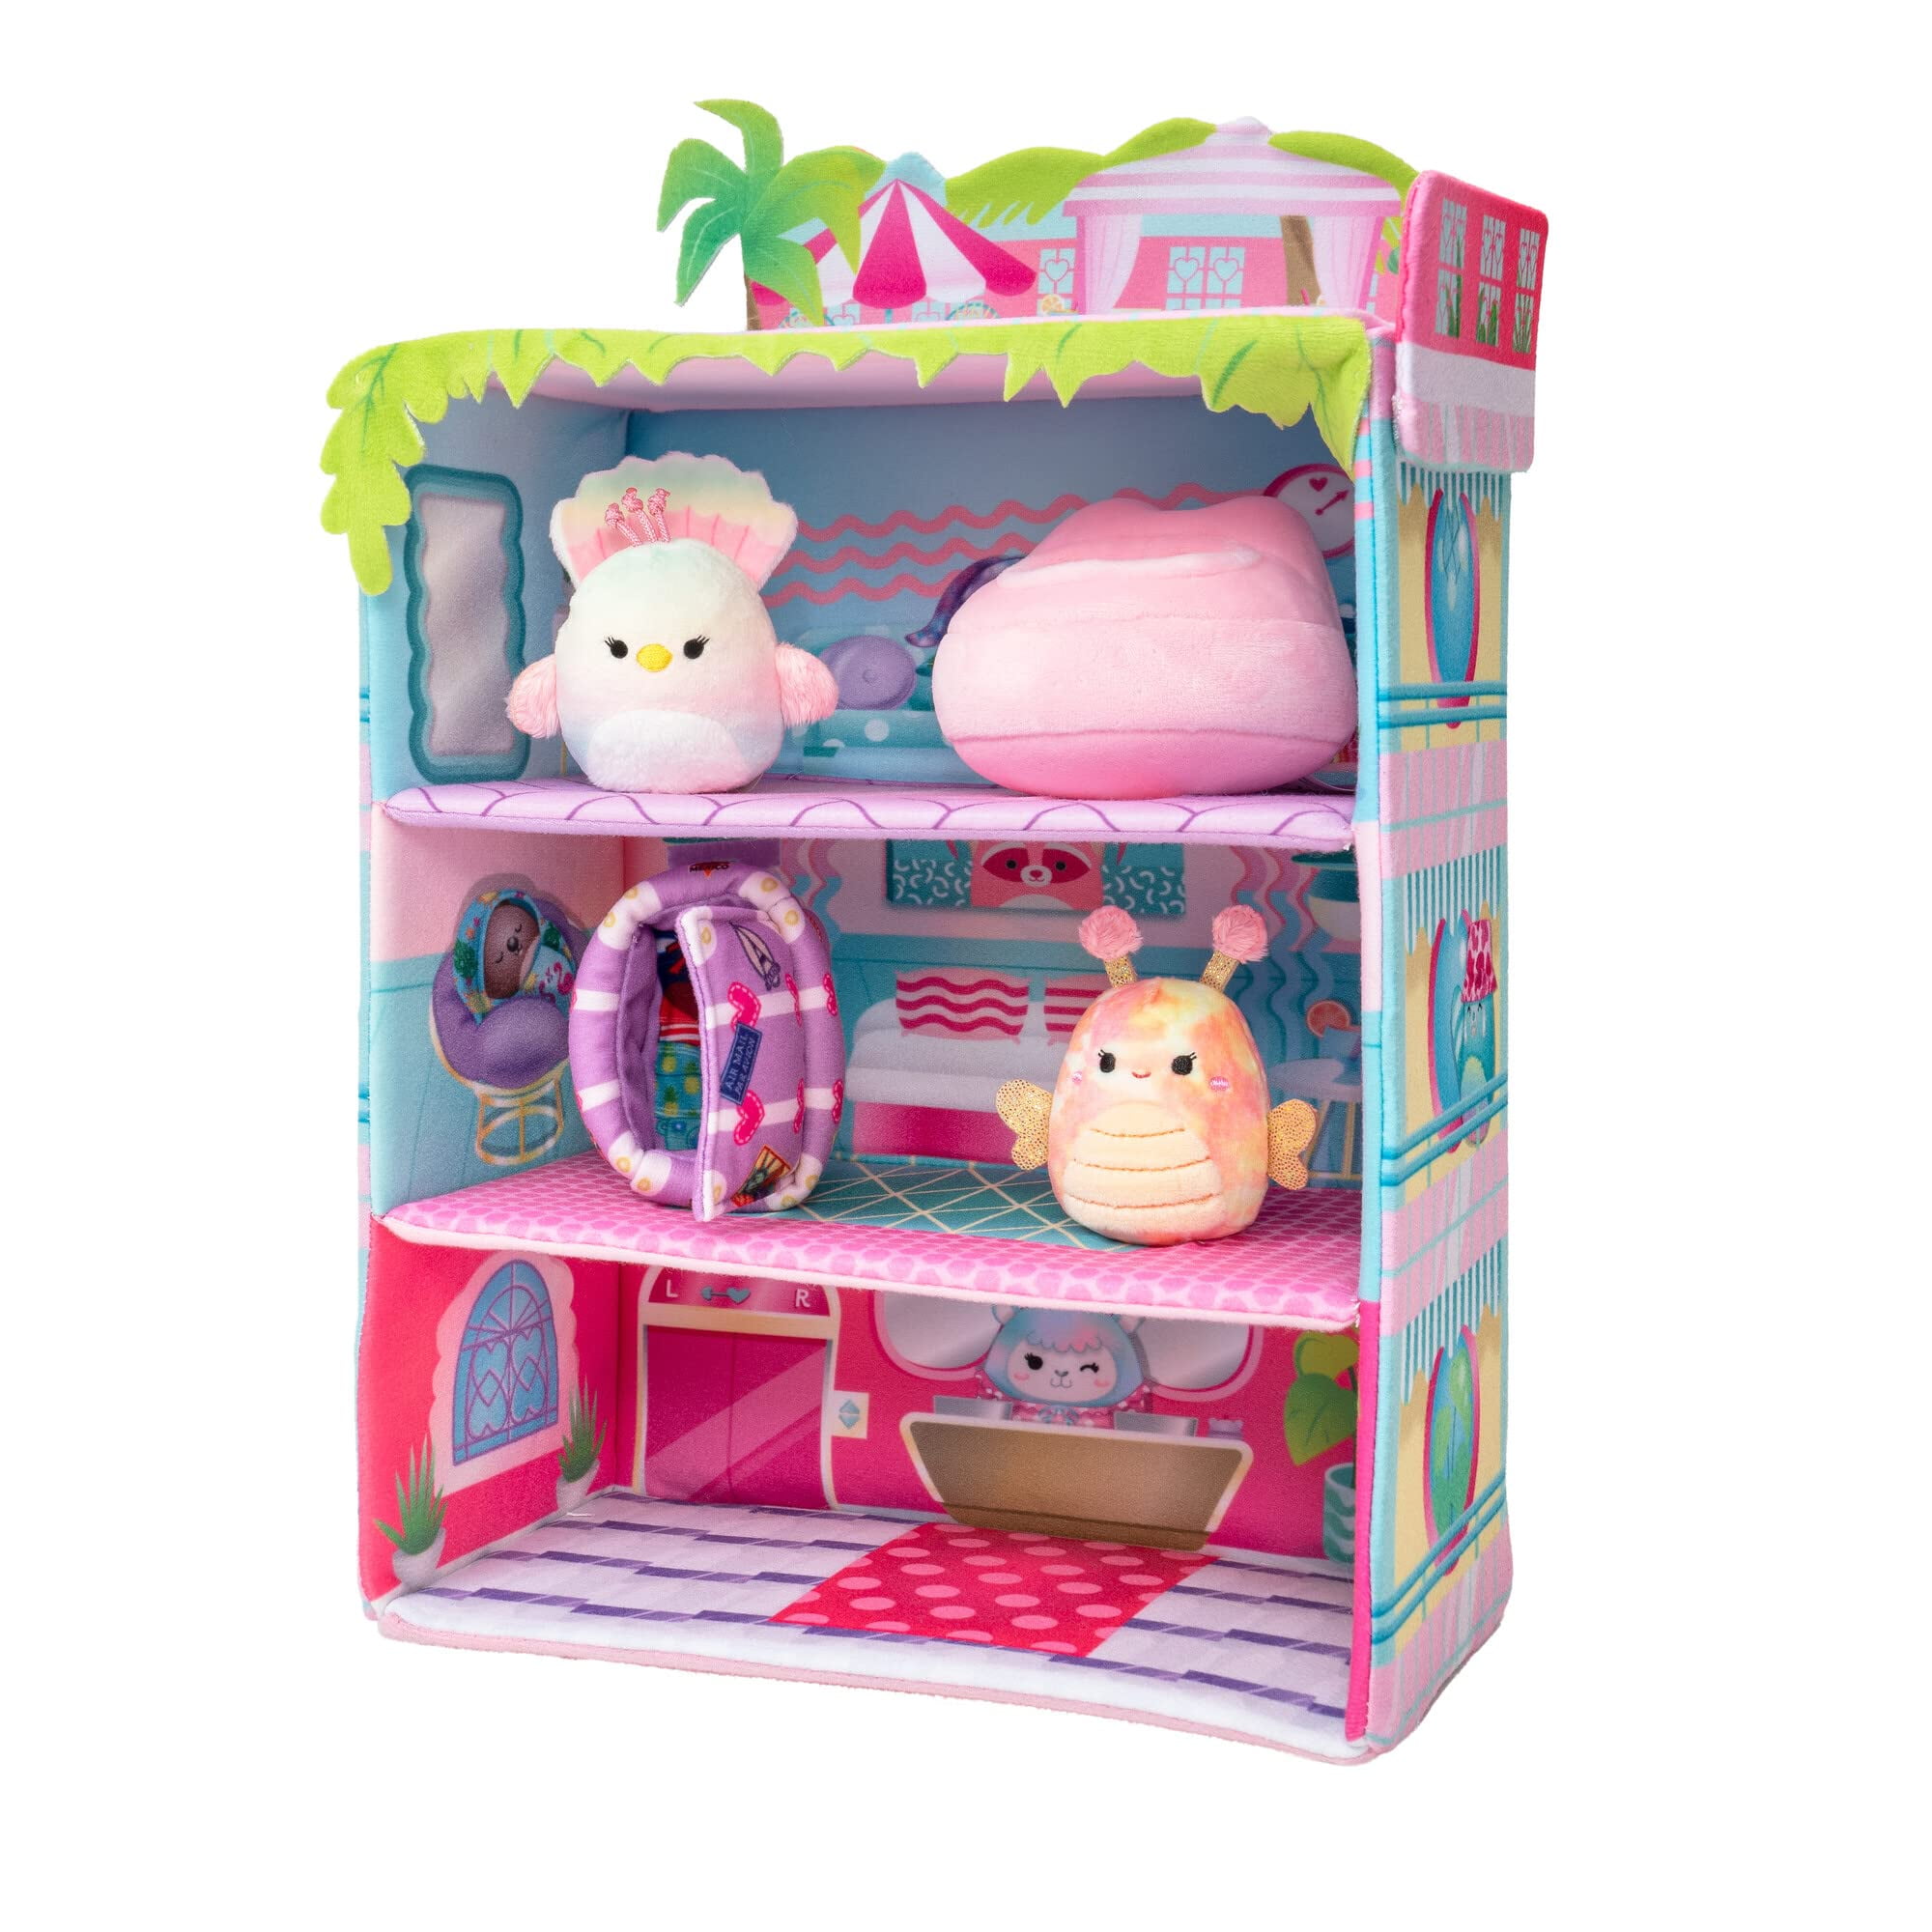 Squishville by Squishmallow Seven Seas Yacht Deluxe Plush Toy Playset 